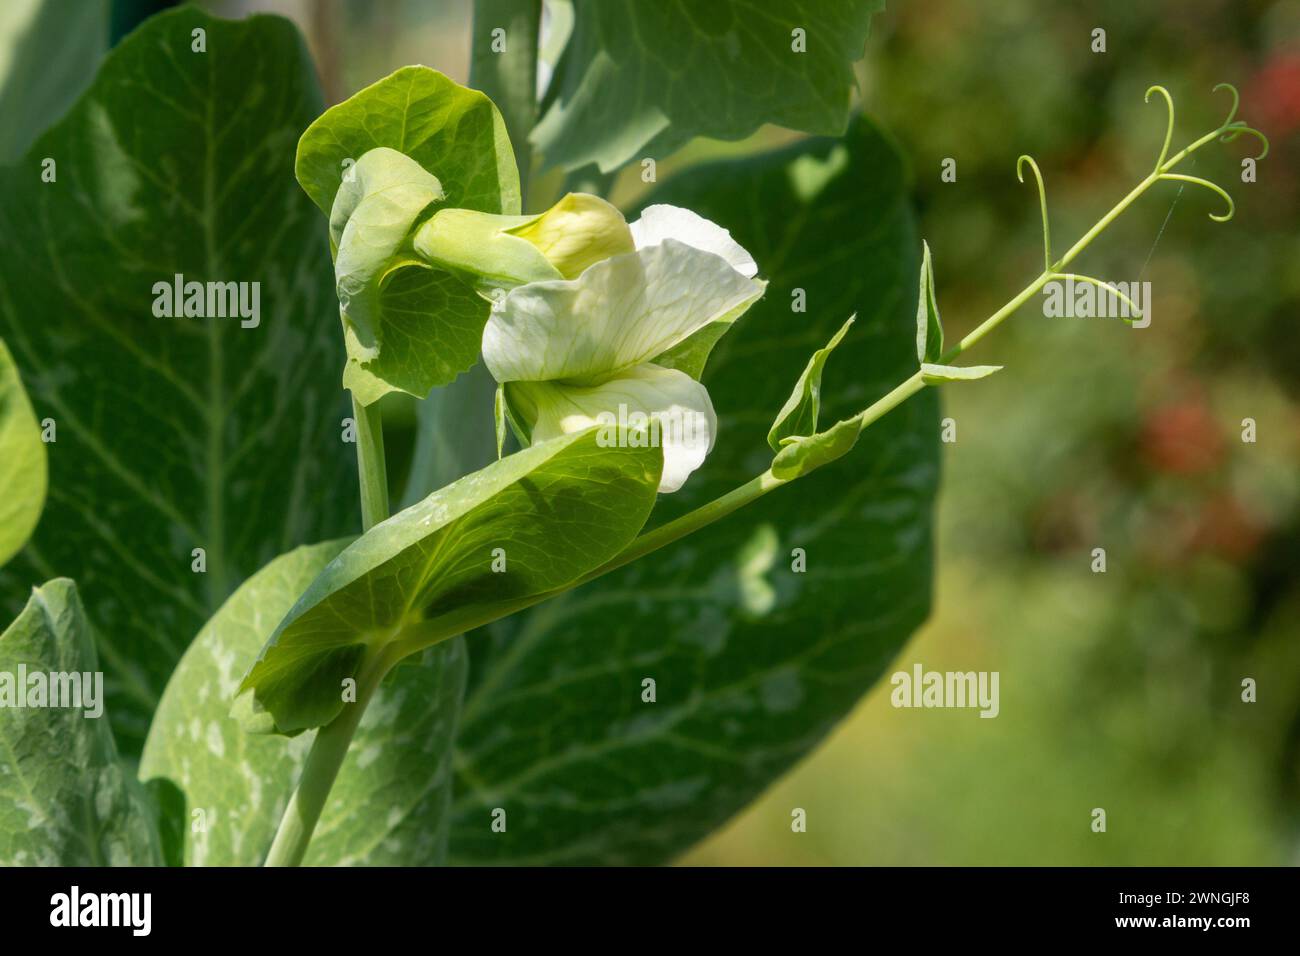 A close up of the white flower and tendril on a pea plant. Summer, England, UK Stock Photo